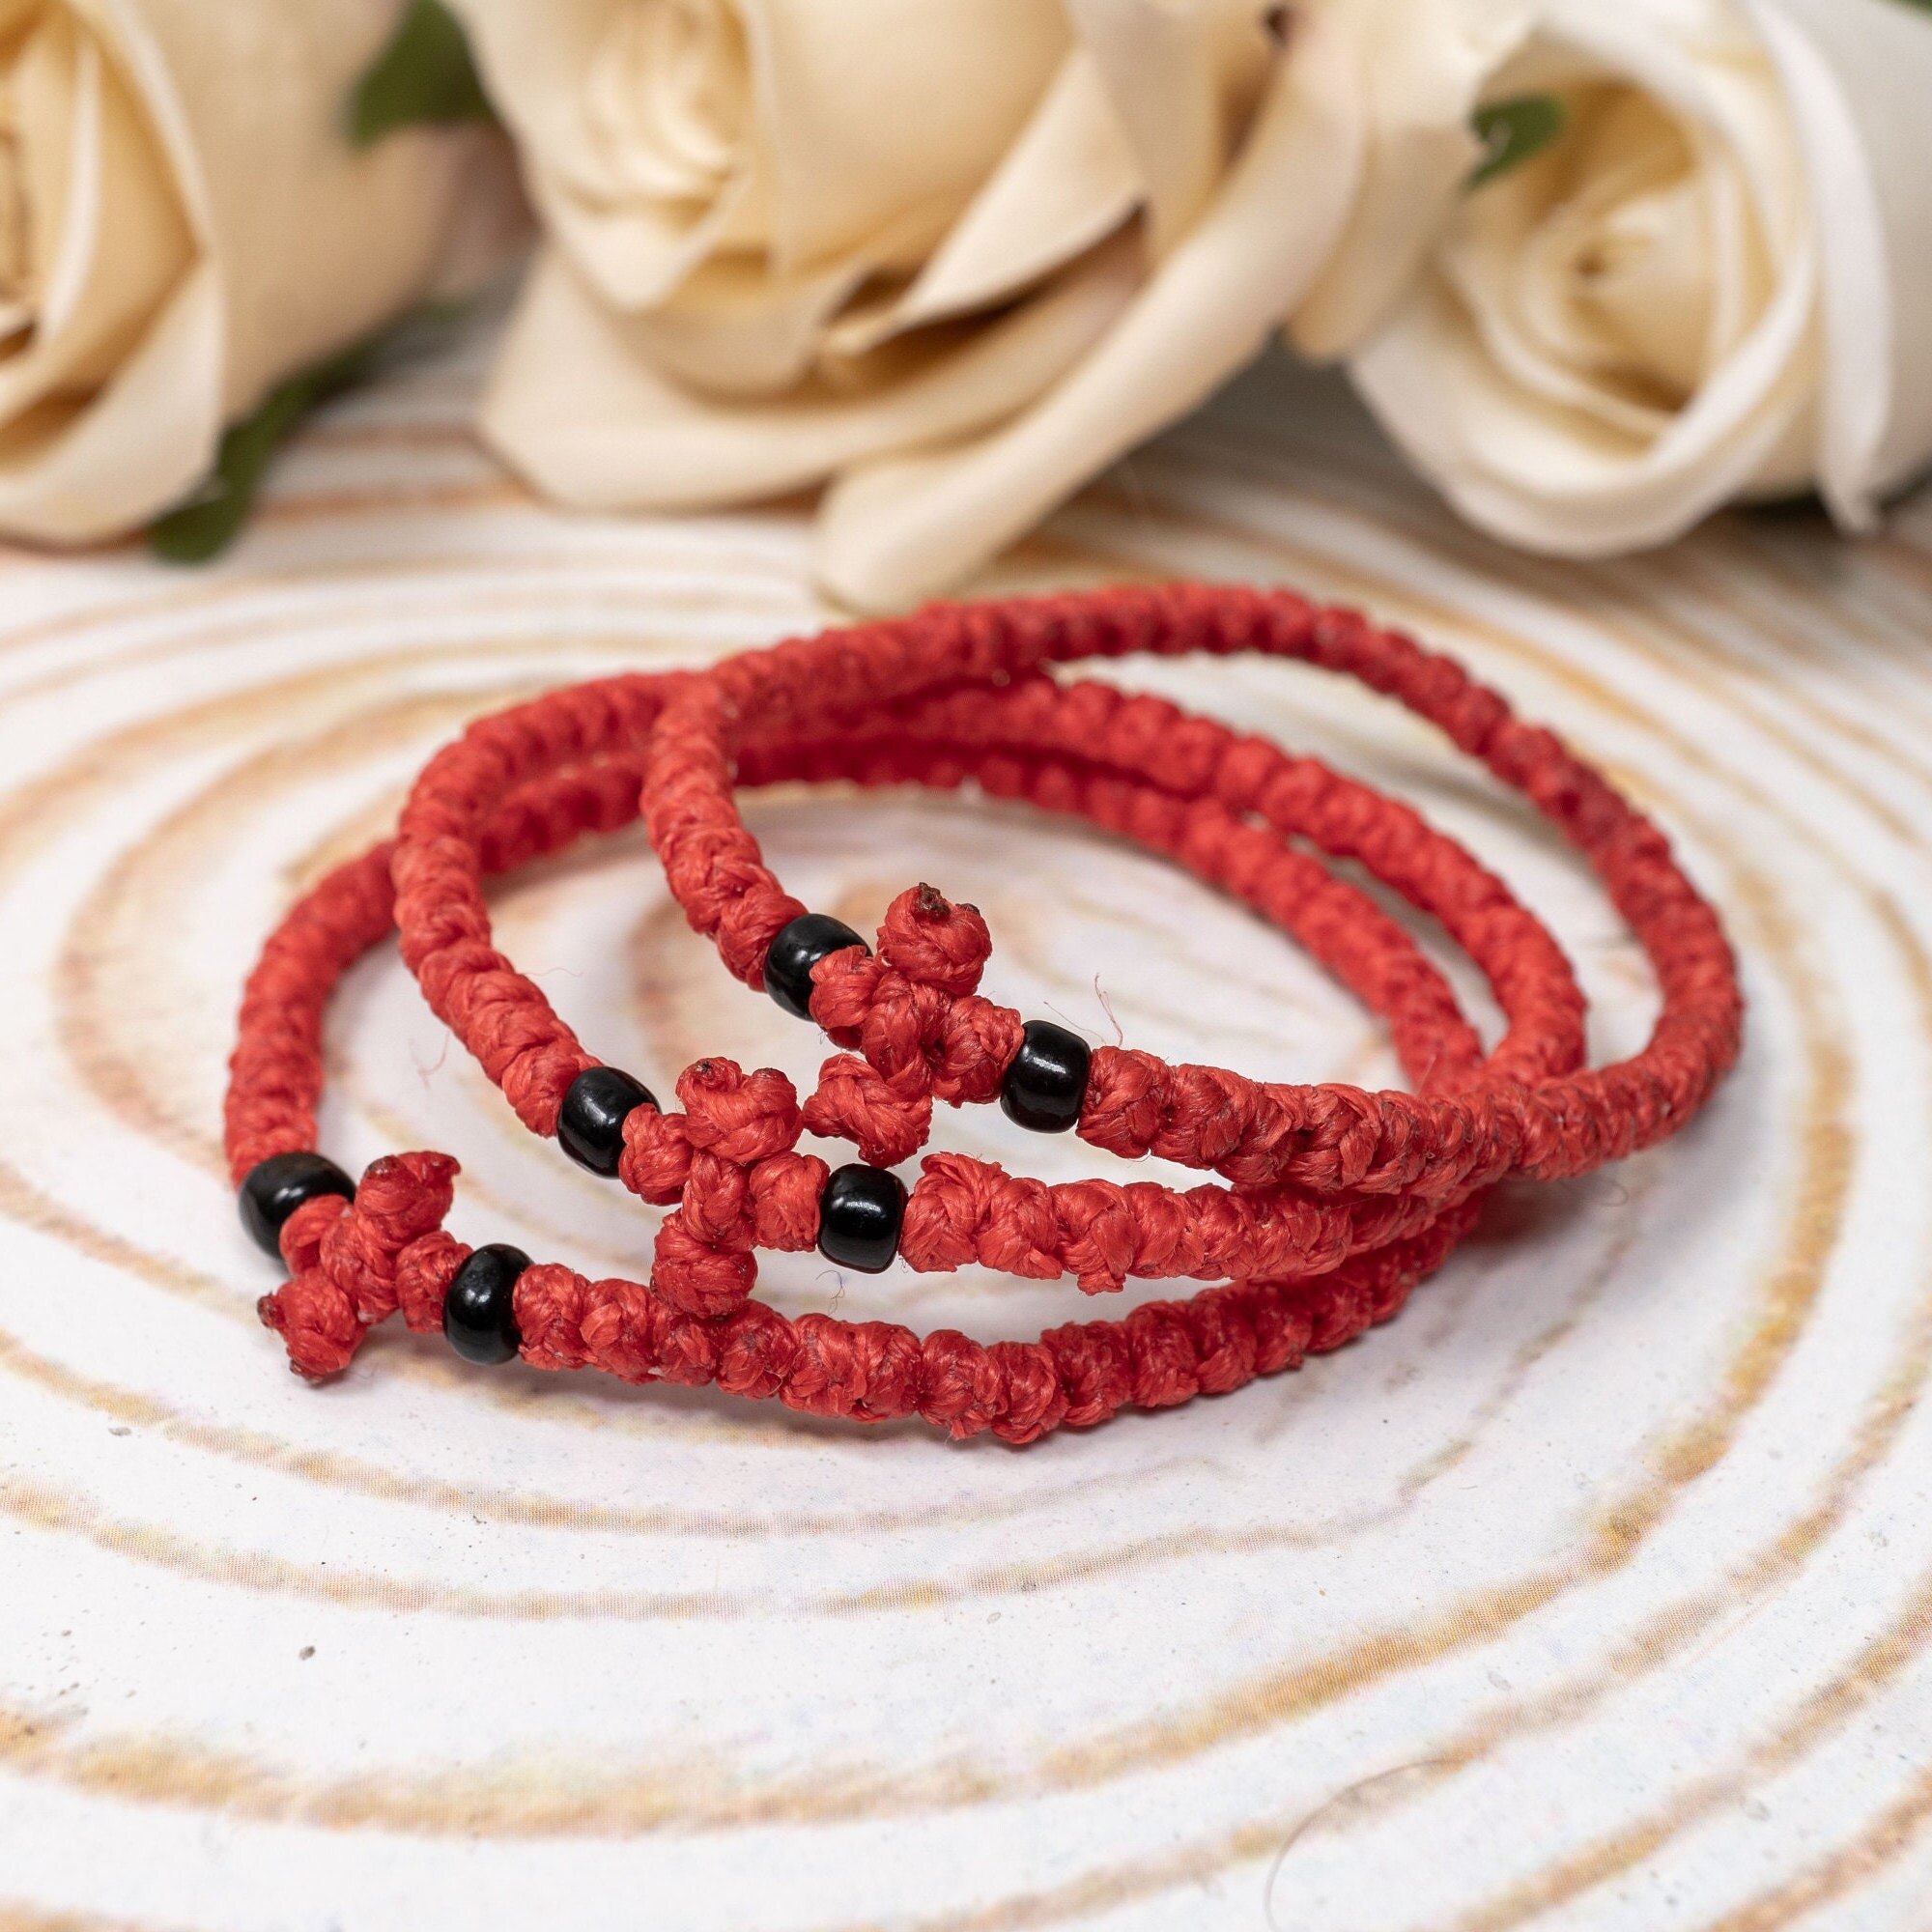 Hinduism (The forgotten facts) - SIGNIFICANCE OF THE RED THREAD TIED AROUND  THE WRIST By Stephen Knapp It is customary for Hindus to tie a red thread -  commonly called a mauli